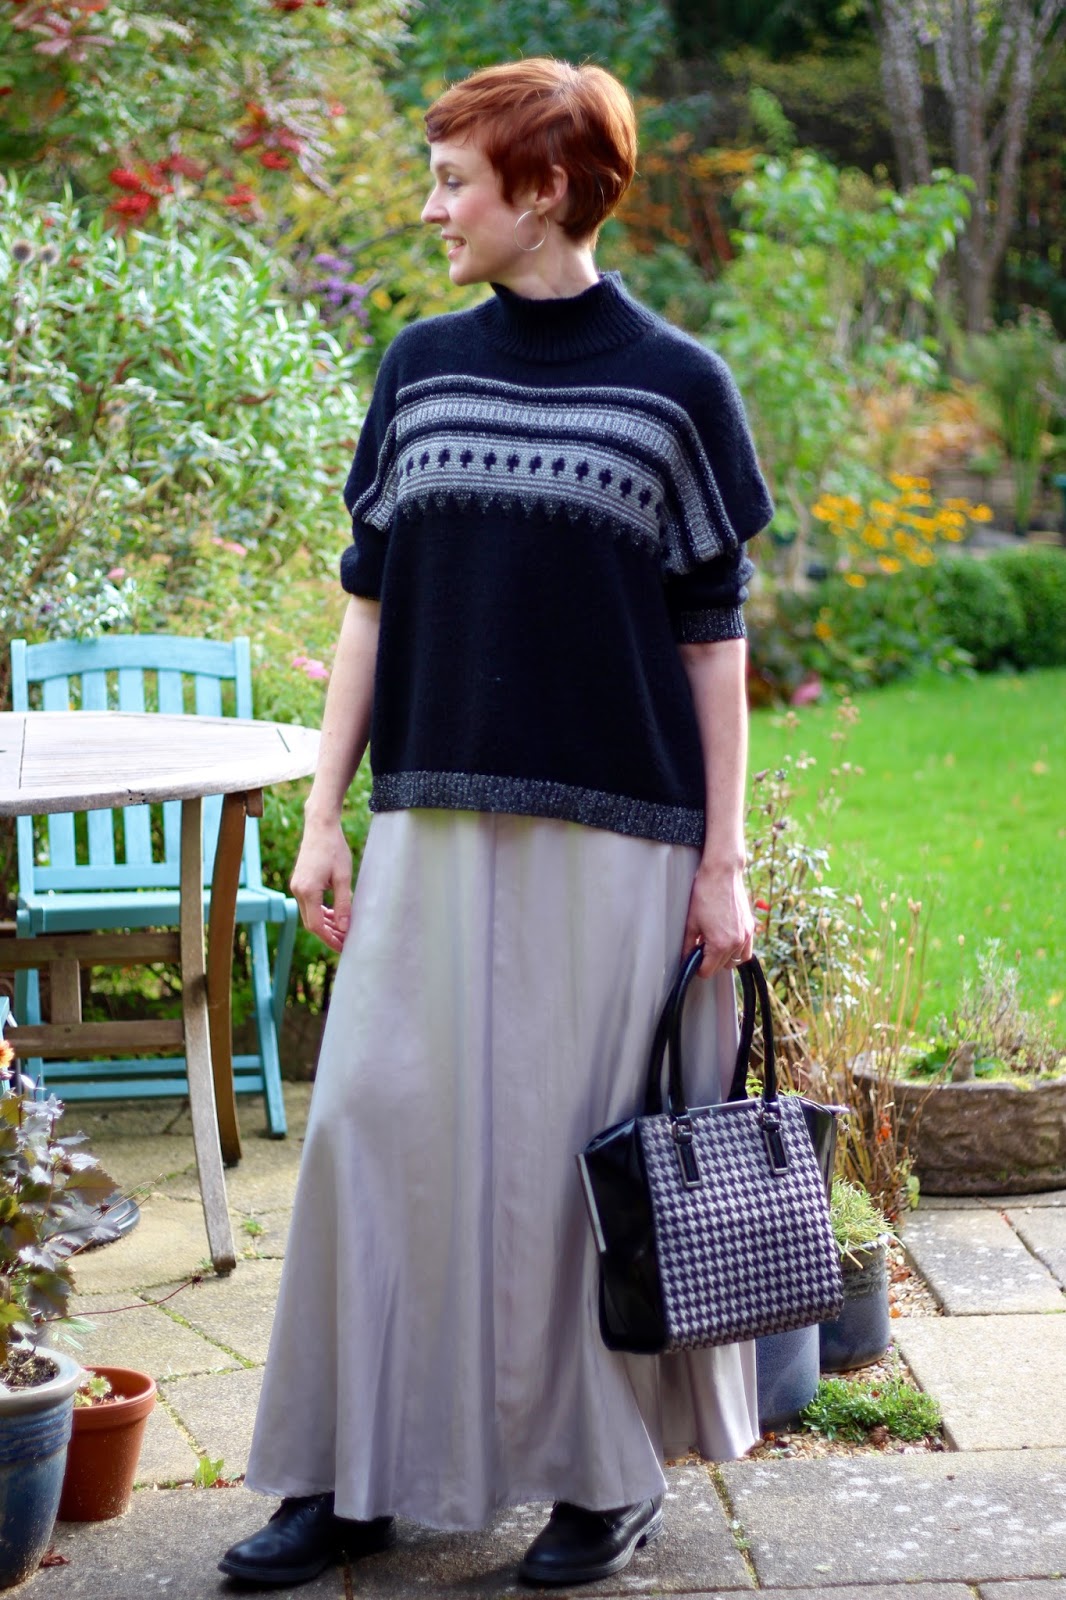 Silver Maxi Skirt & Black Boots | Autumn Style, over 40.